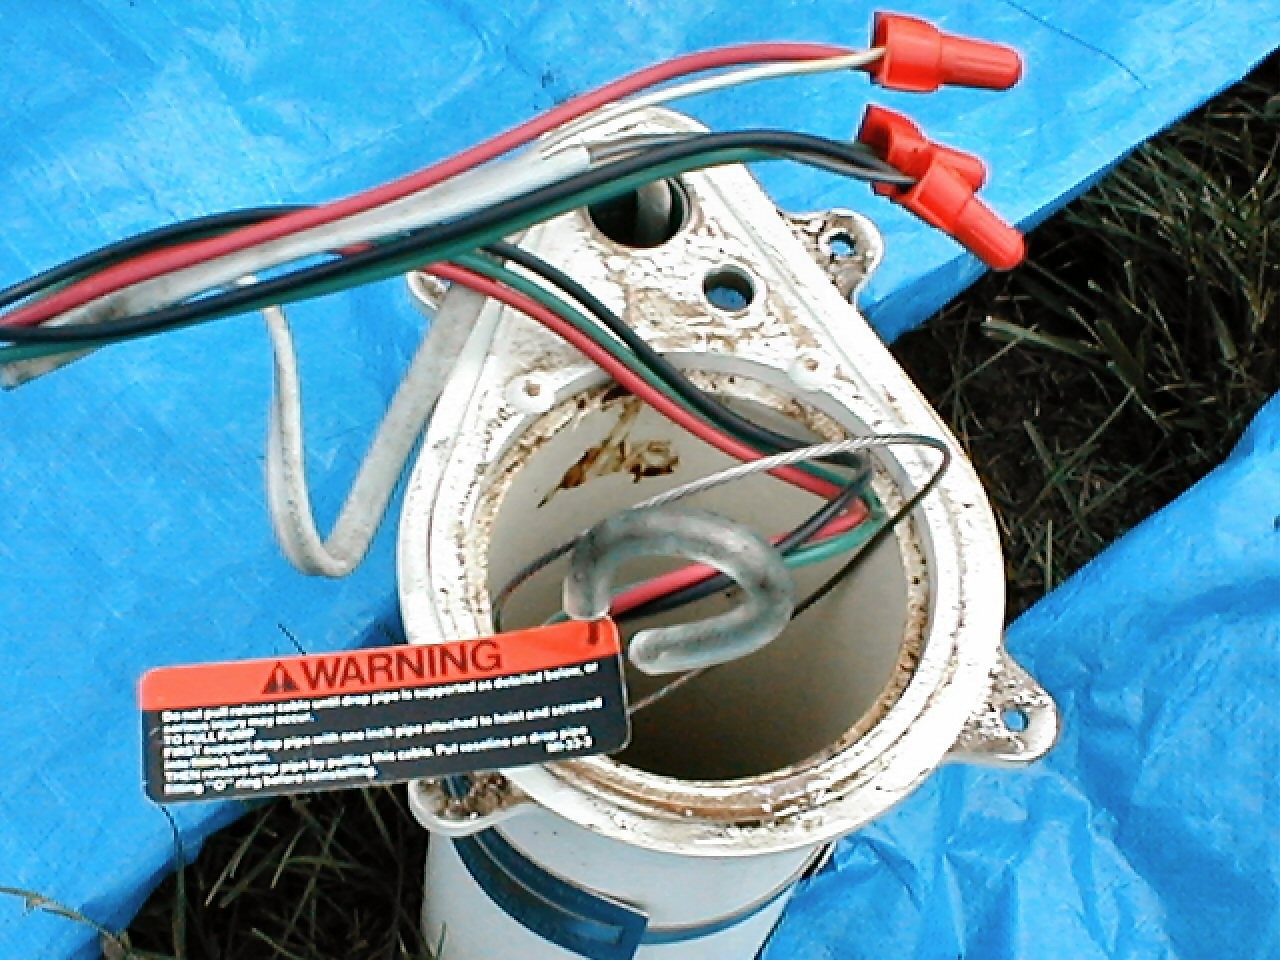 Wires with connector caps showing outside well casing